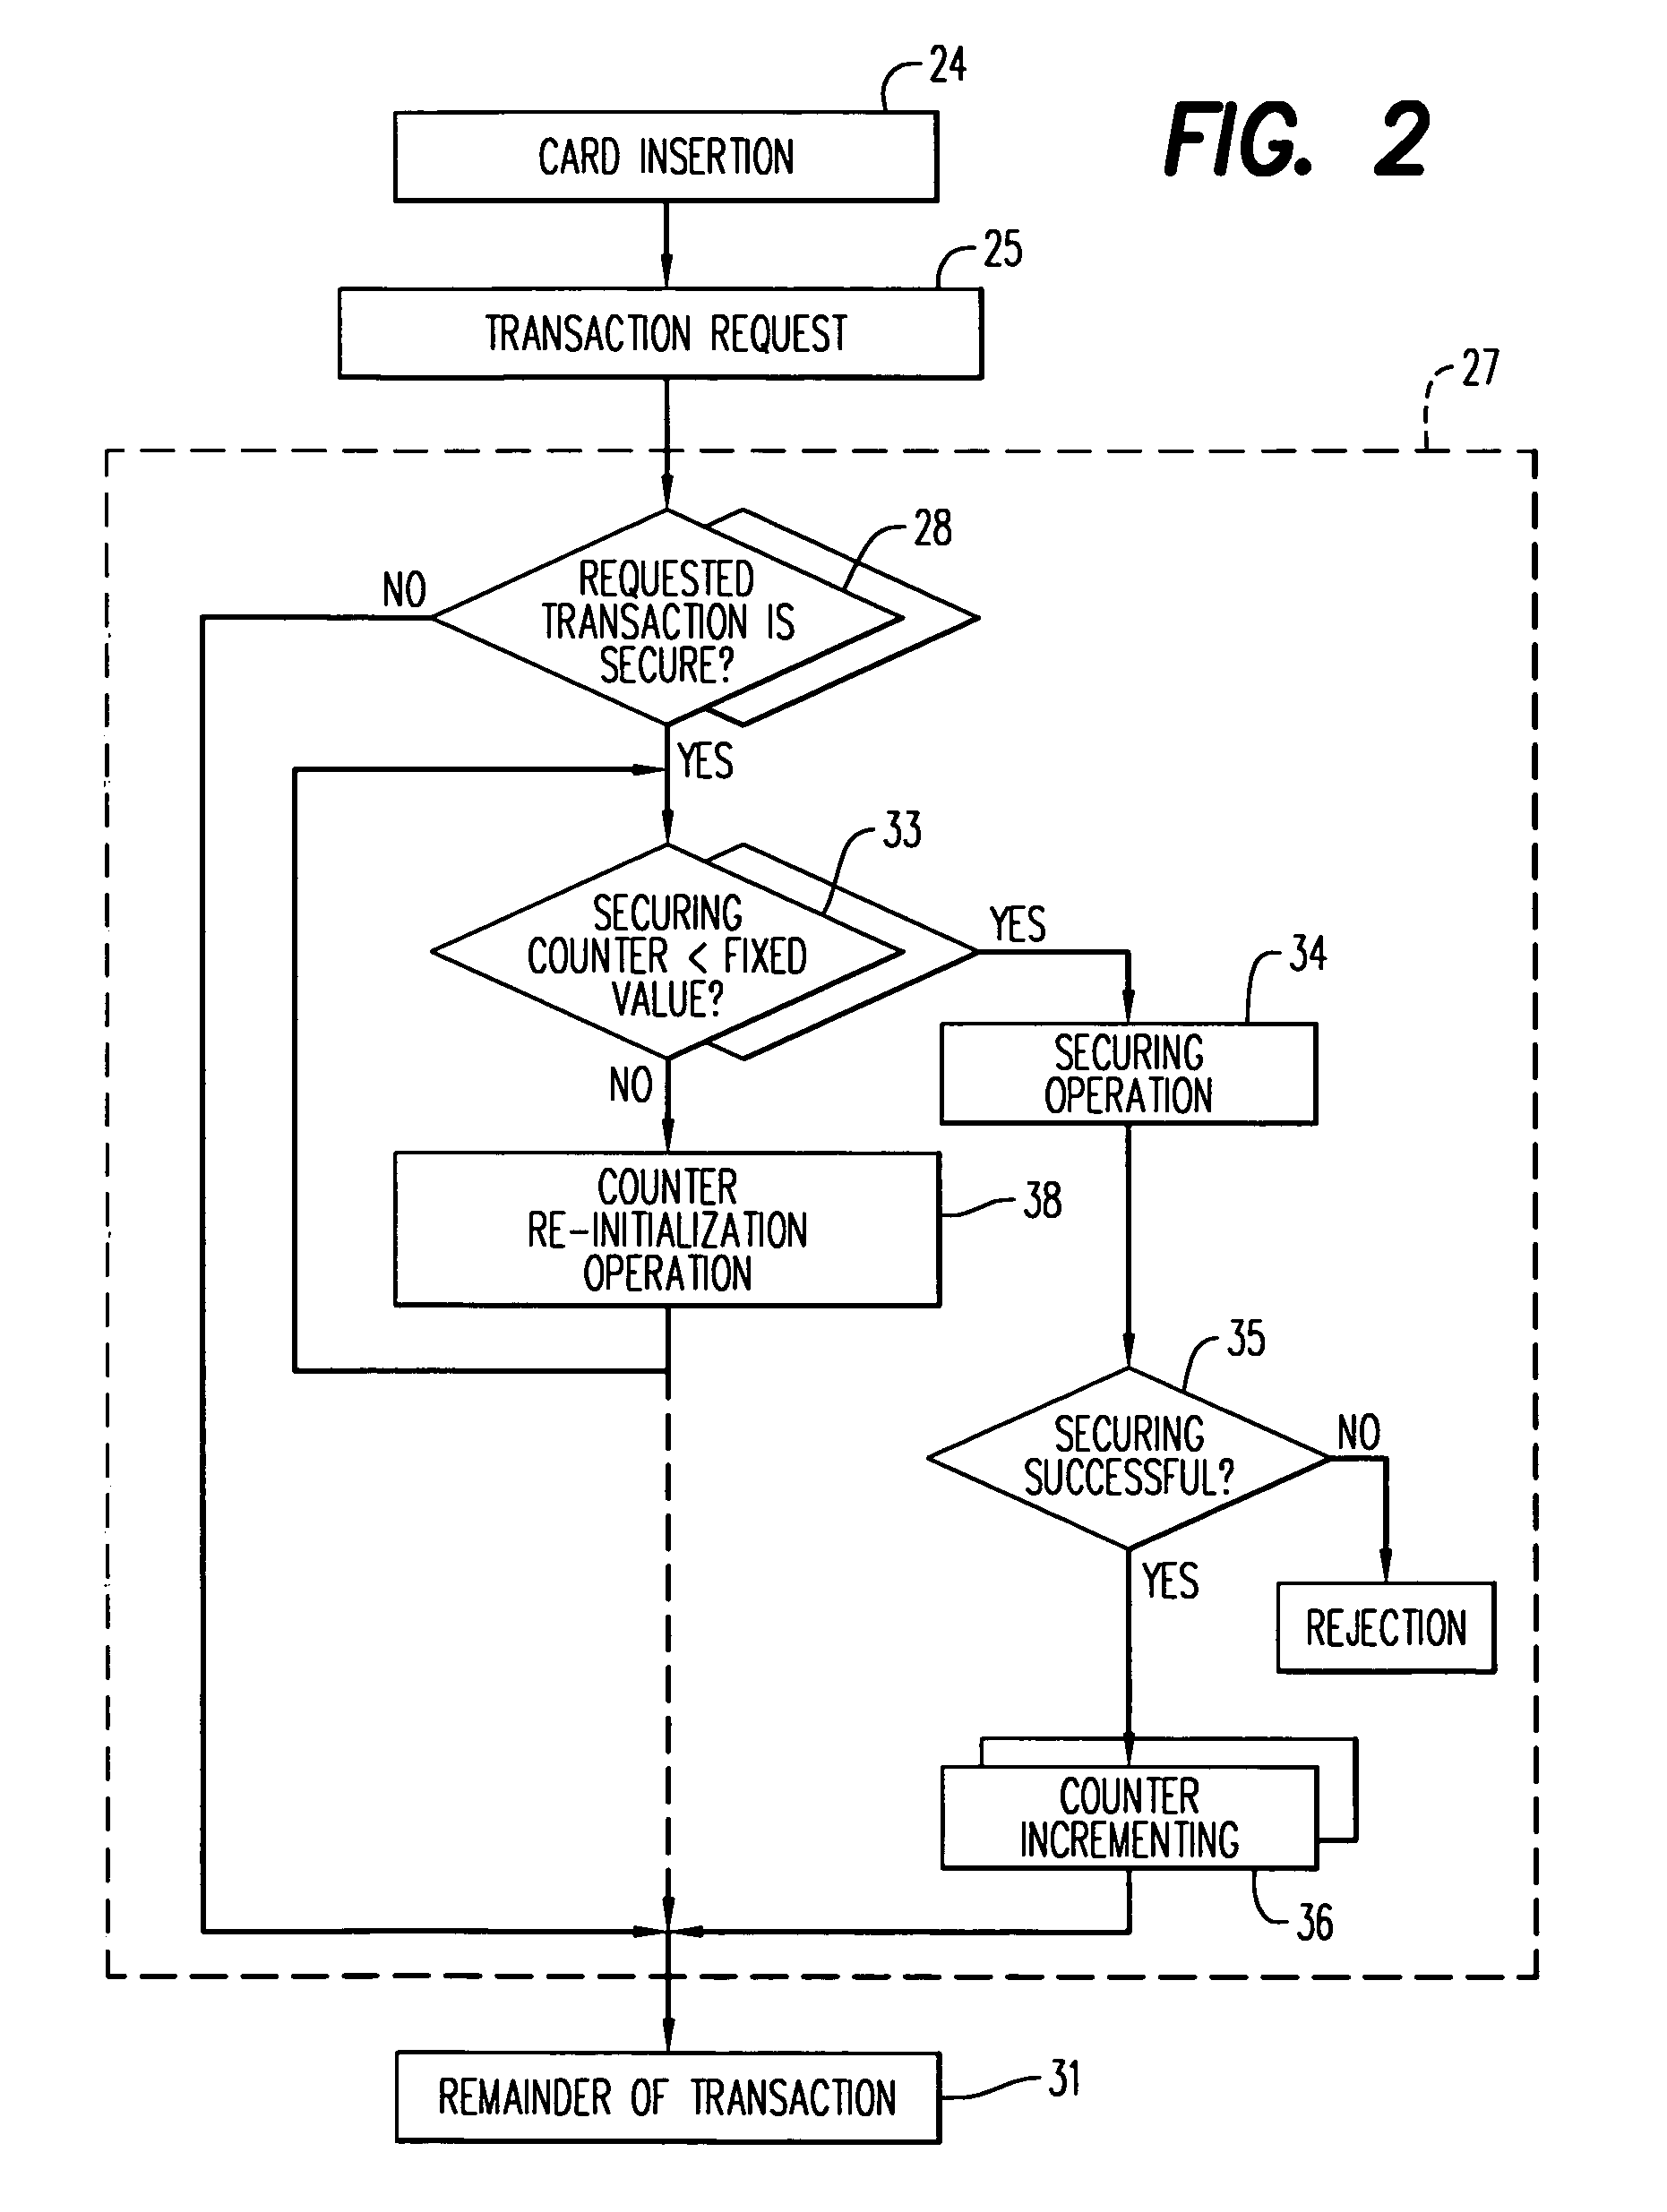 Method for managing a secure terminal